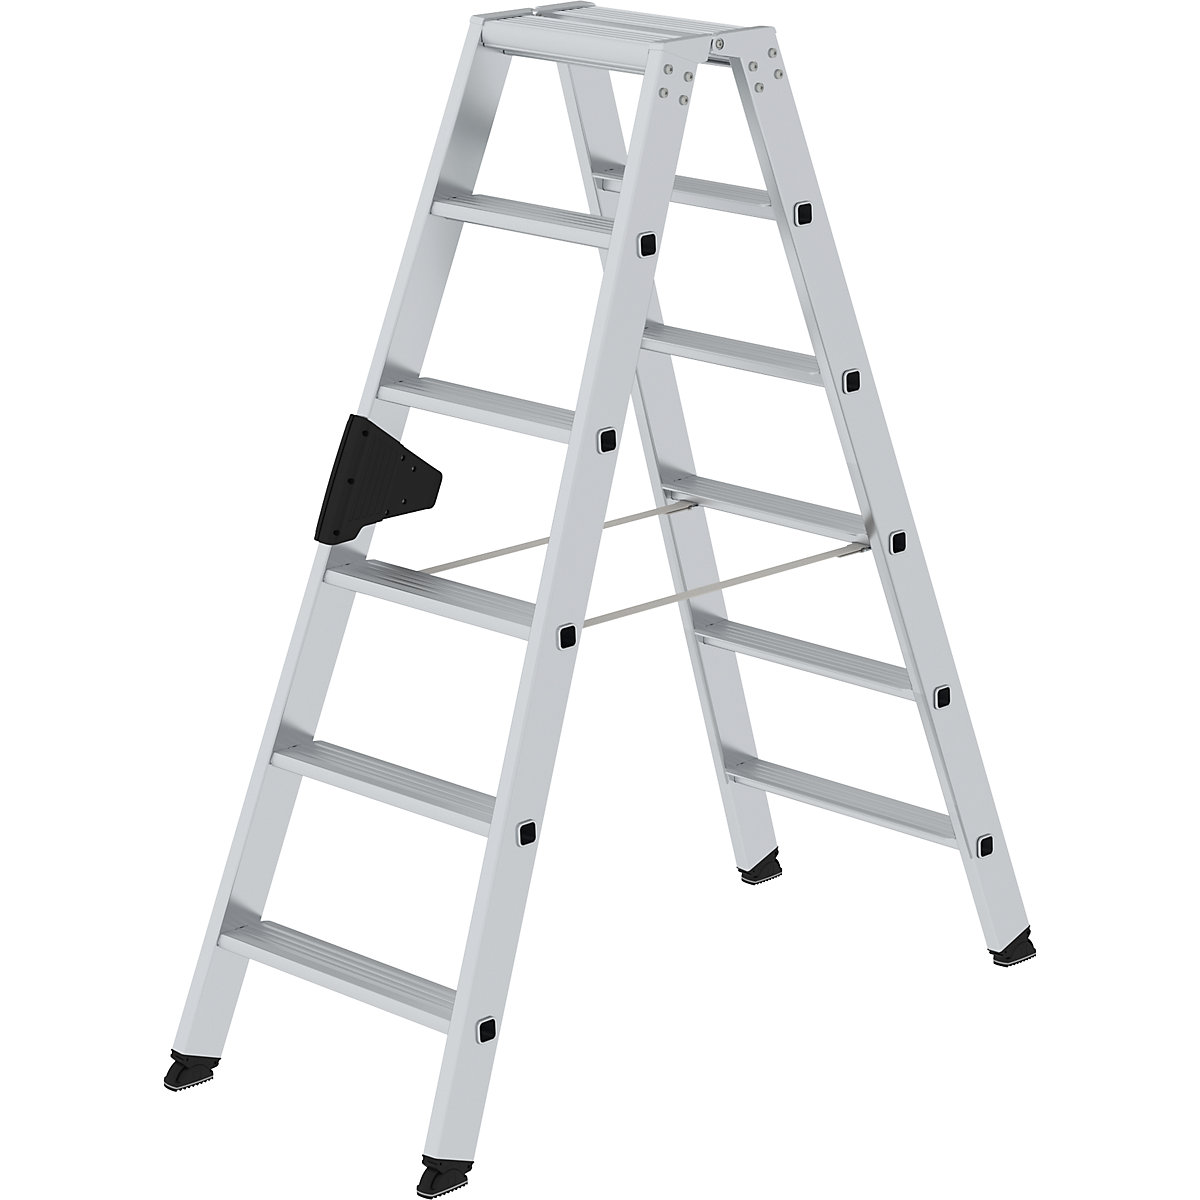 Step ladder, double sided – MUNK, comfort model with ergo pad®, 2x6 steps-9